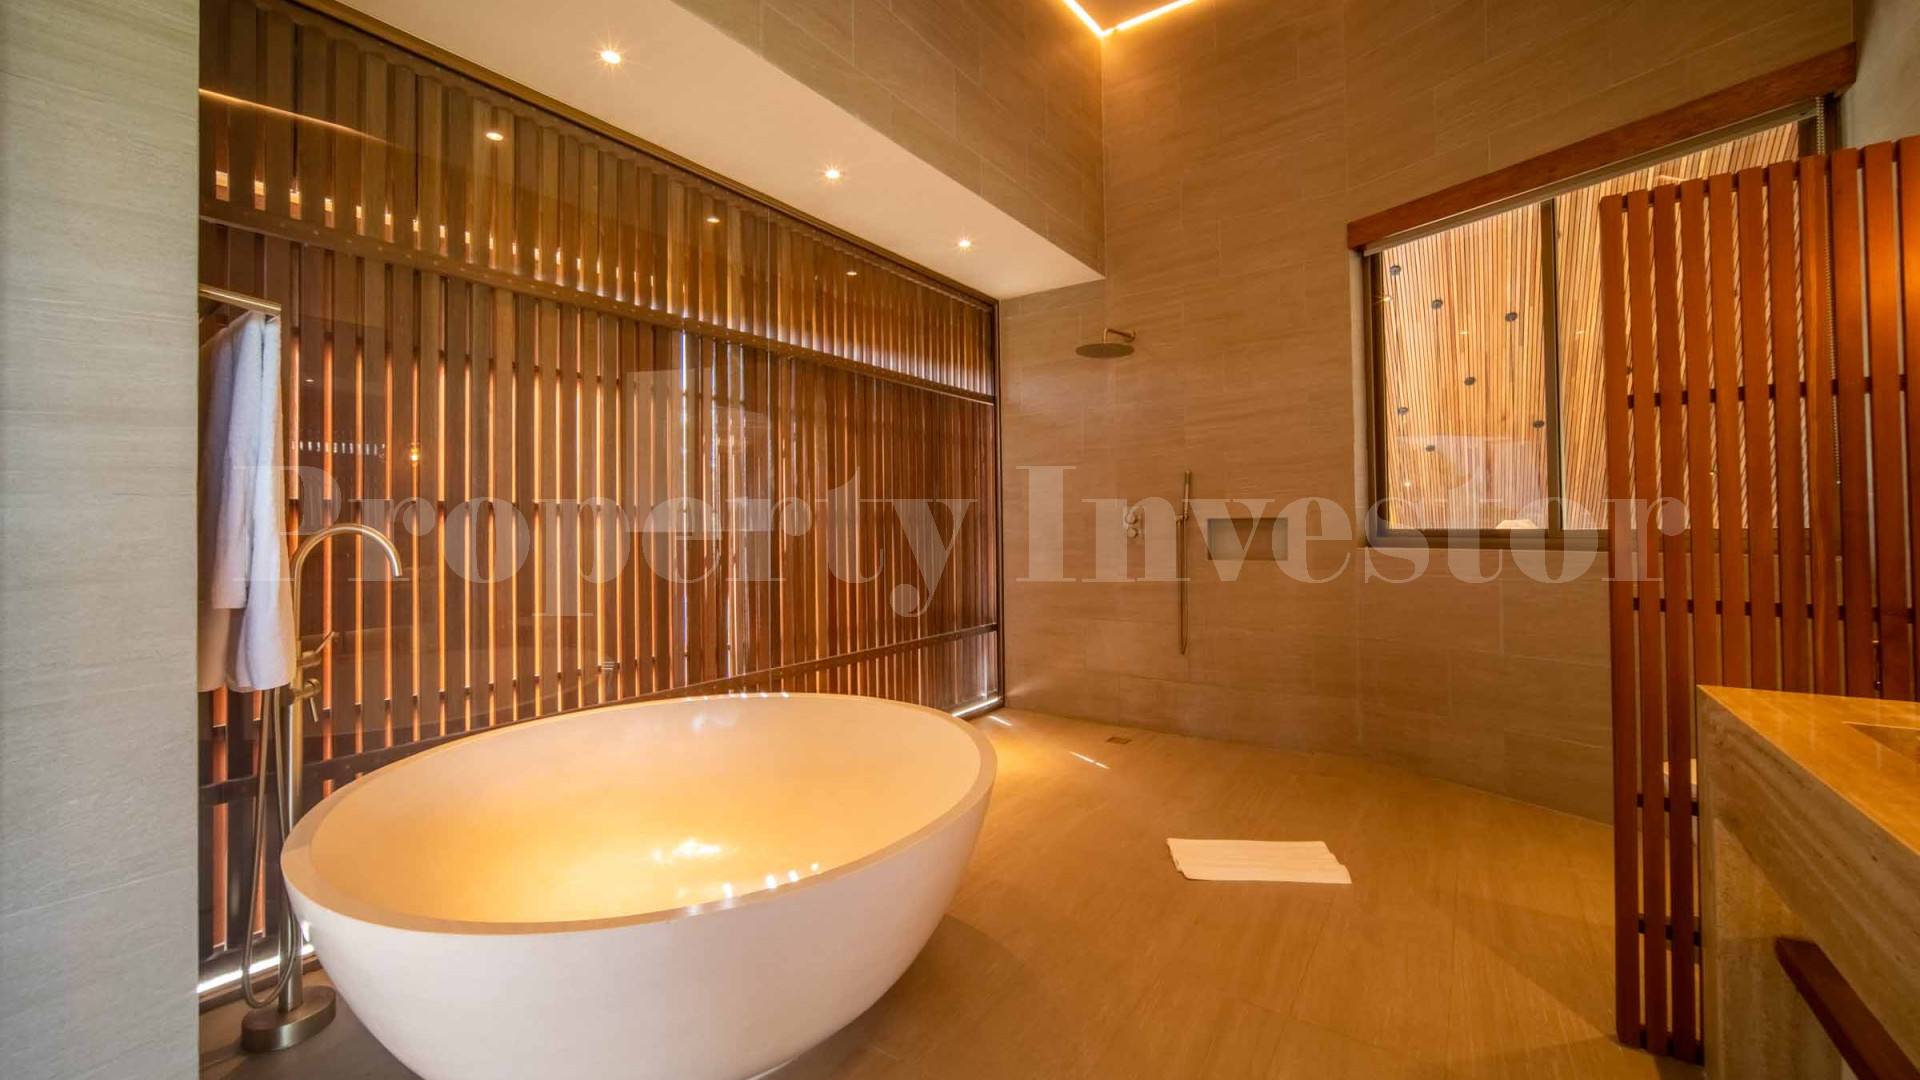 Immaculate 4 Bedroom Ultra-Luxe Villa with High-End Finish for Sale in Canggu Berawa, Bali